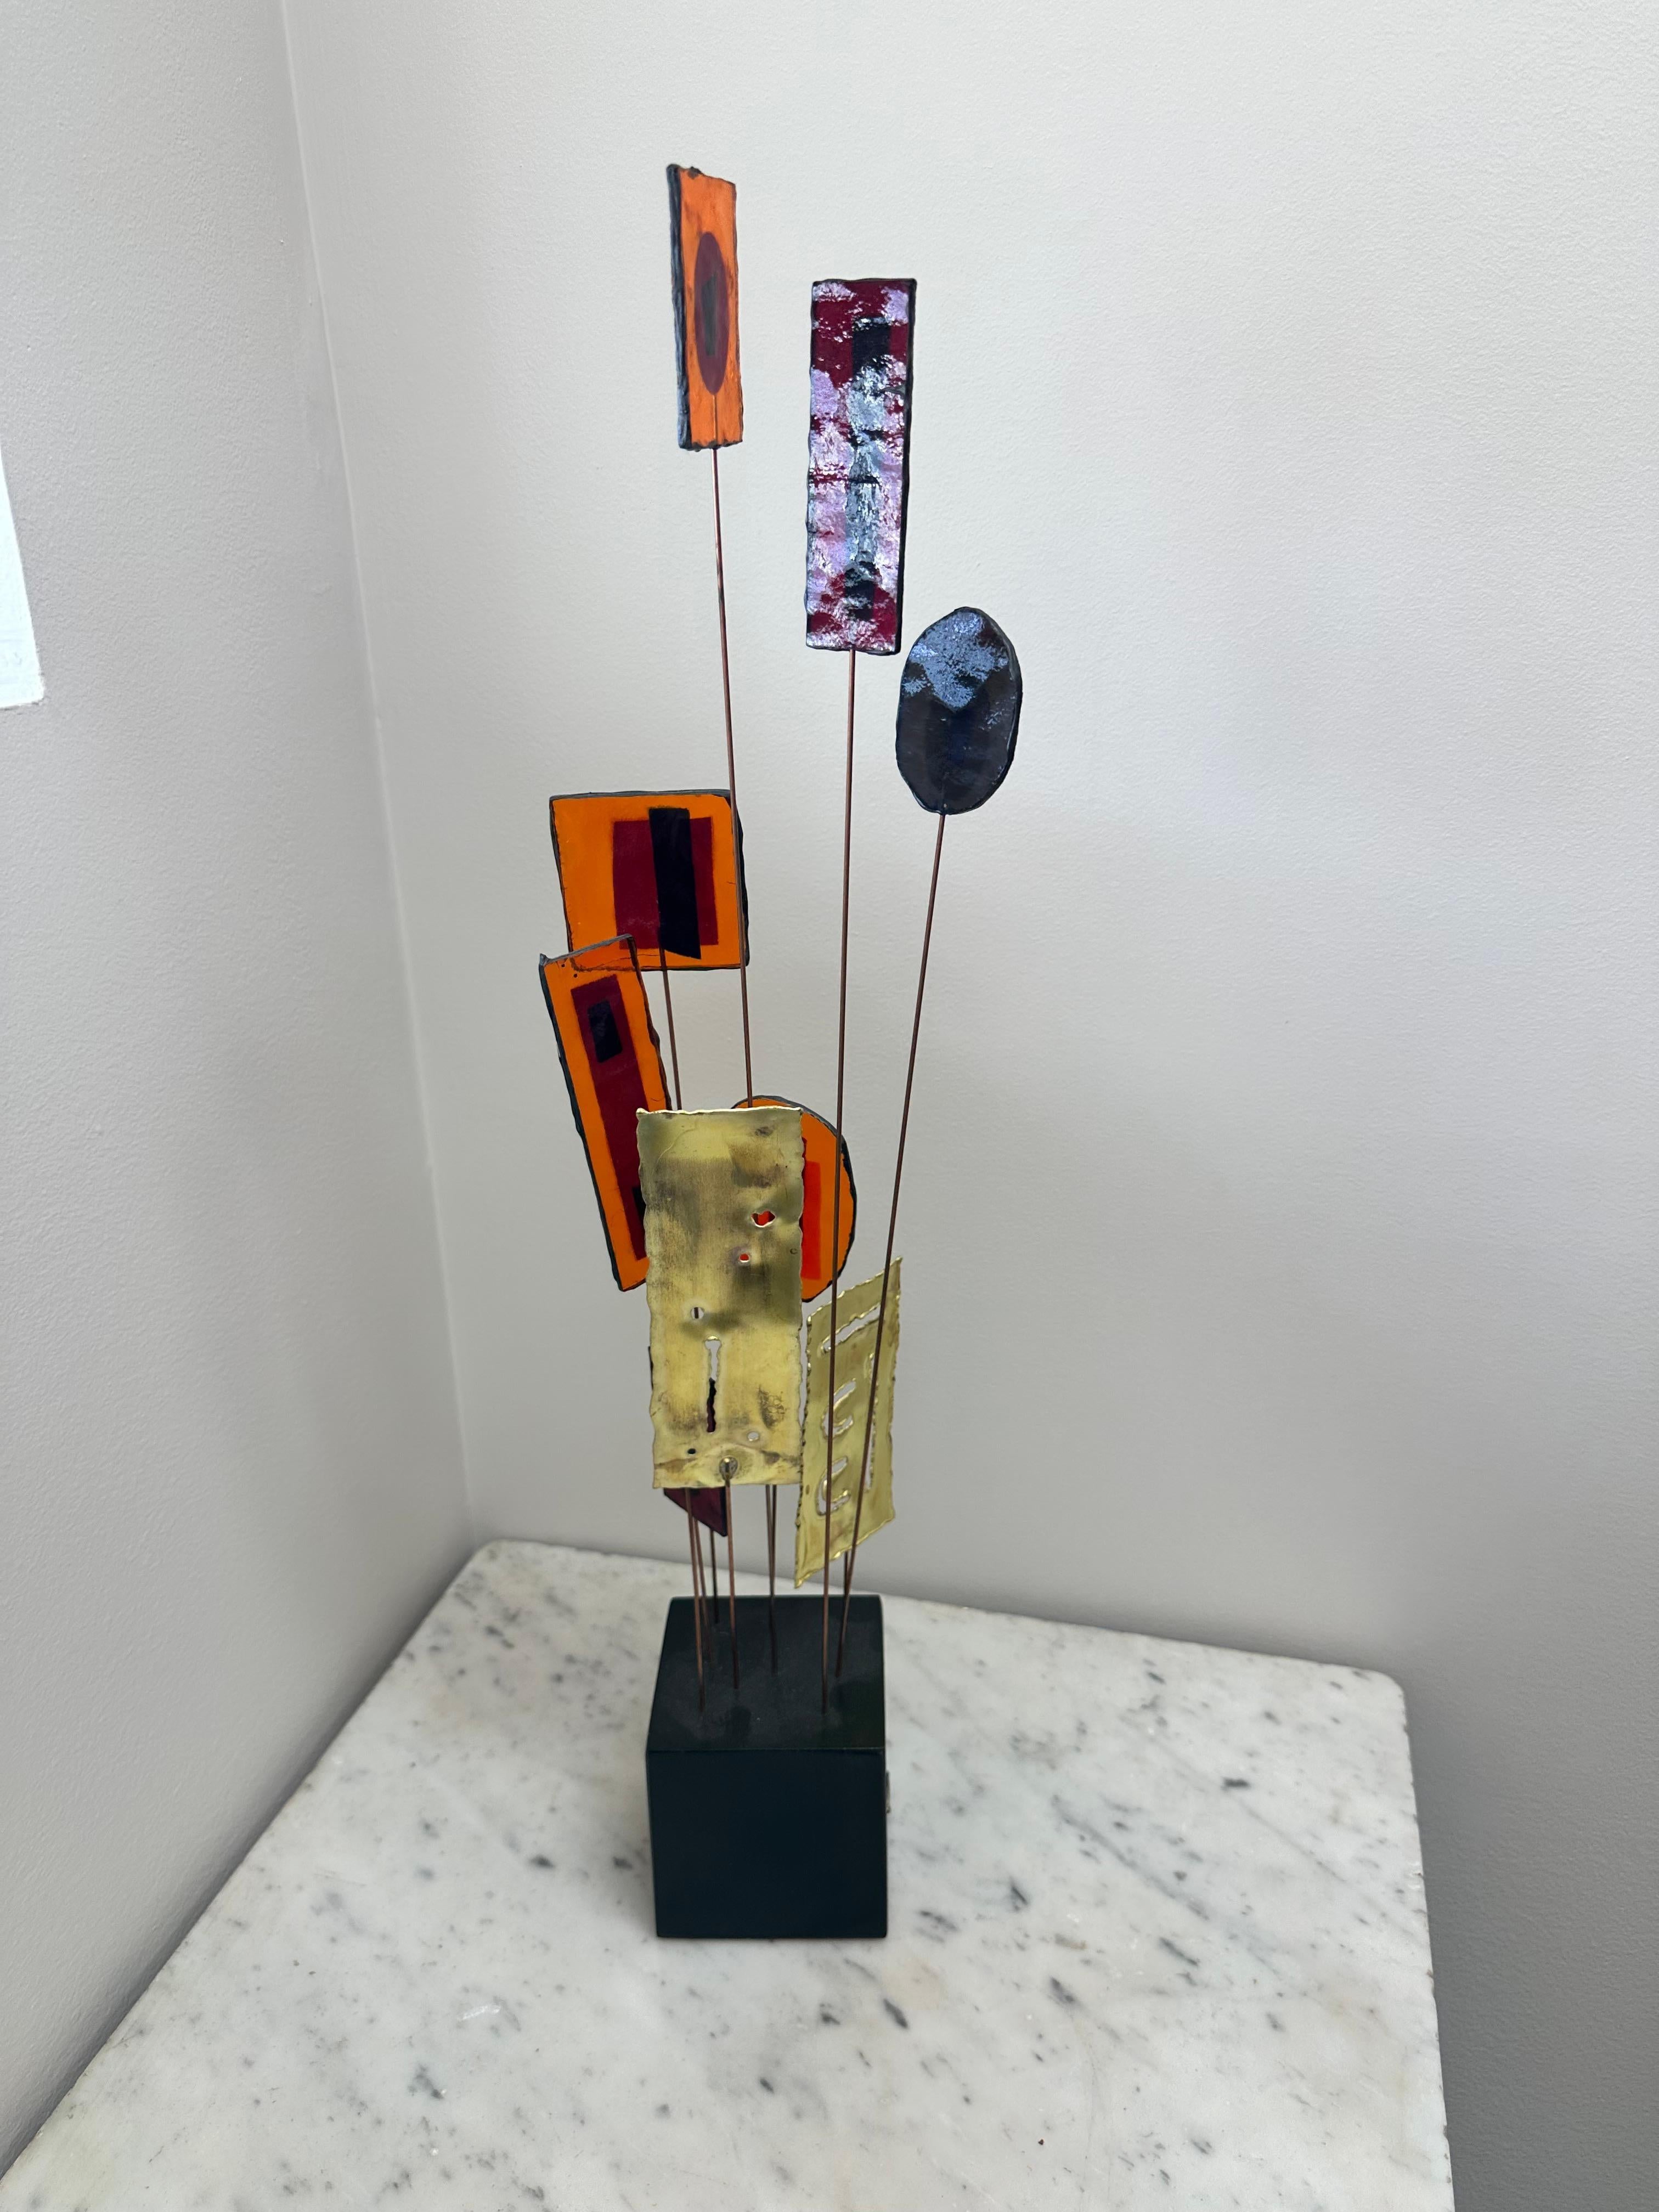 Modernist Kinetic Table Sculpture by C. Jeré  

An early and rare form 1960s fun and colorful kinetic table sculpture by Curtis Jeré. Brass and resin pieces mounted are on metal rods, and set into an ebonized wooden base. The base is mounted with a